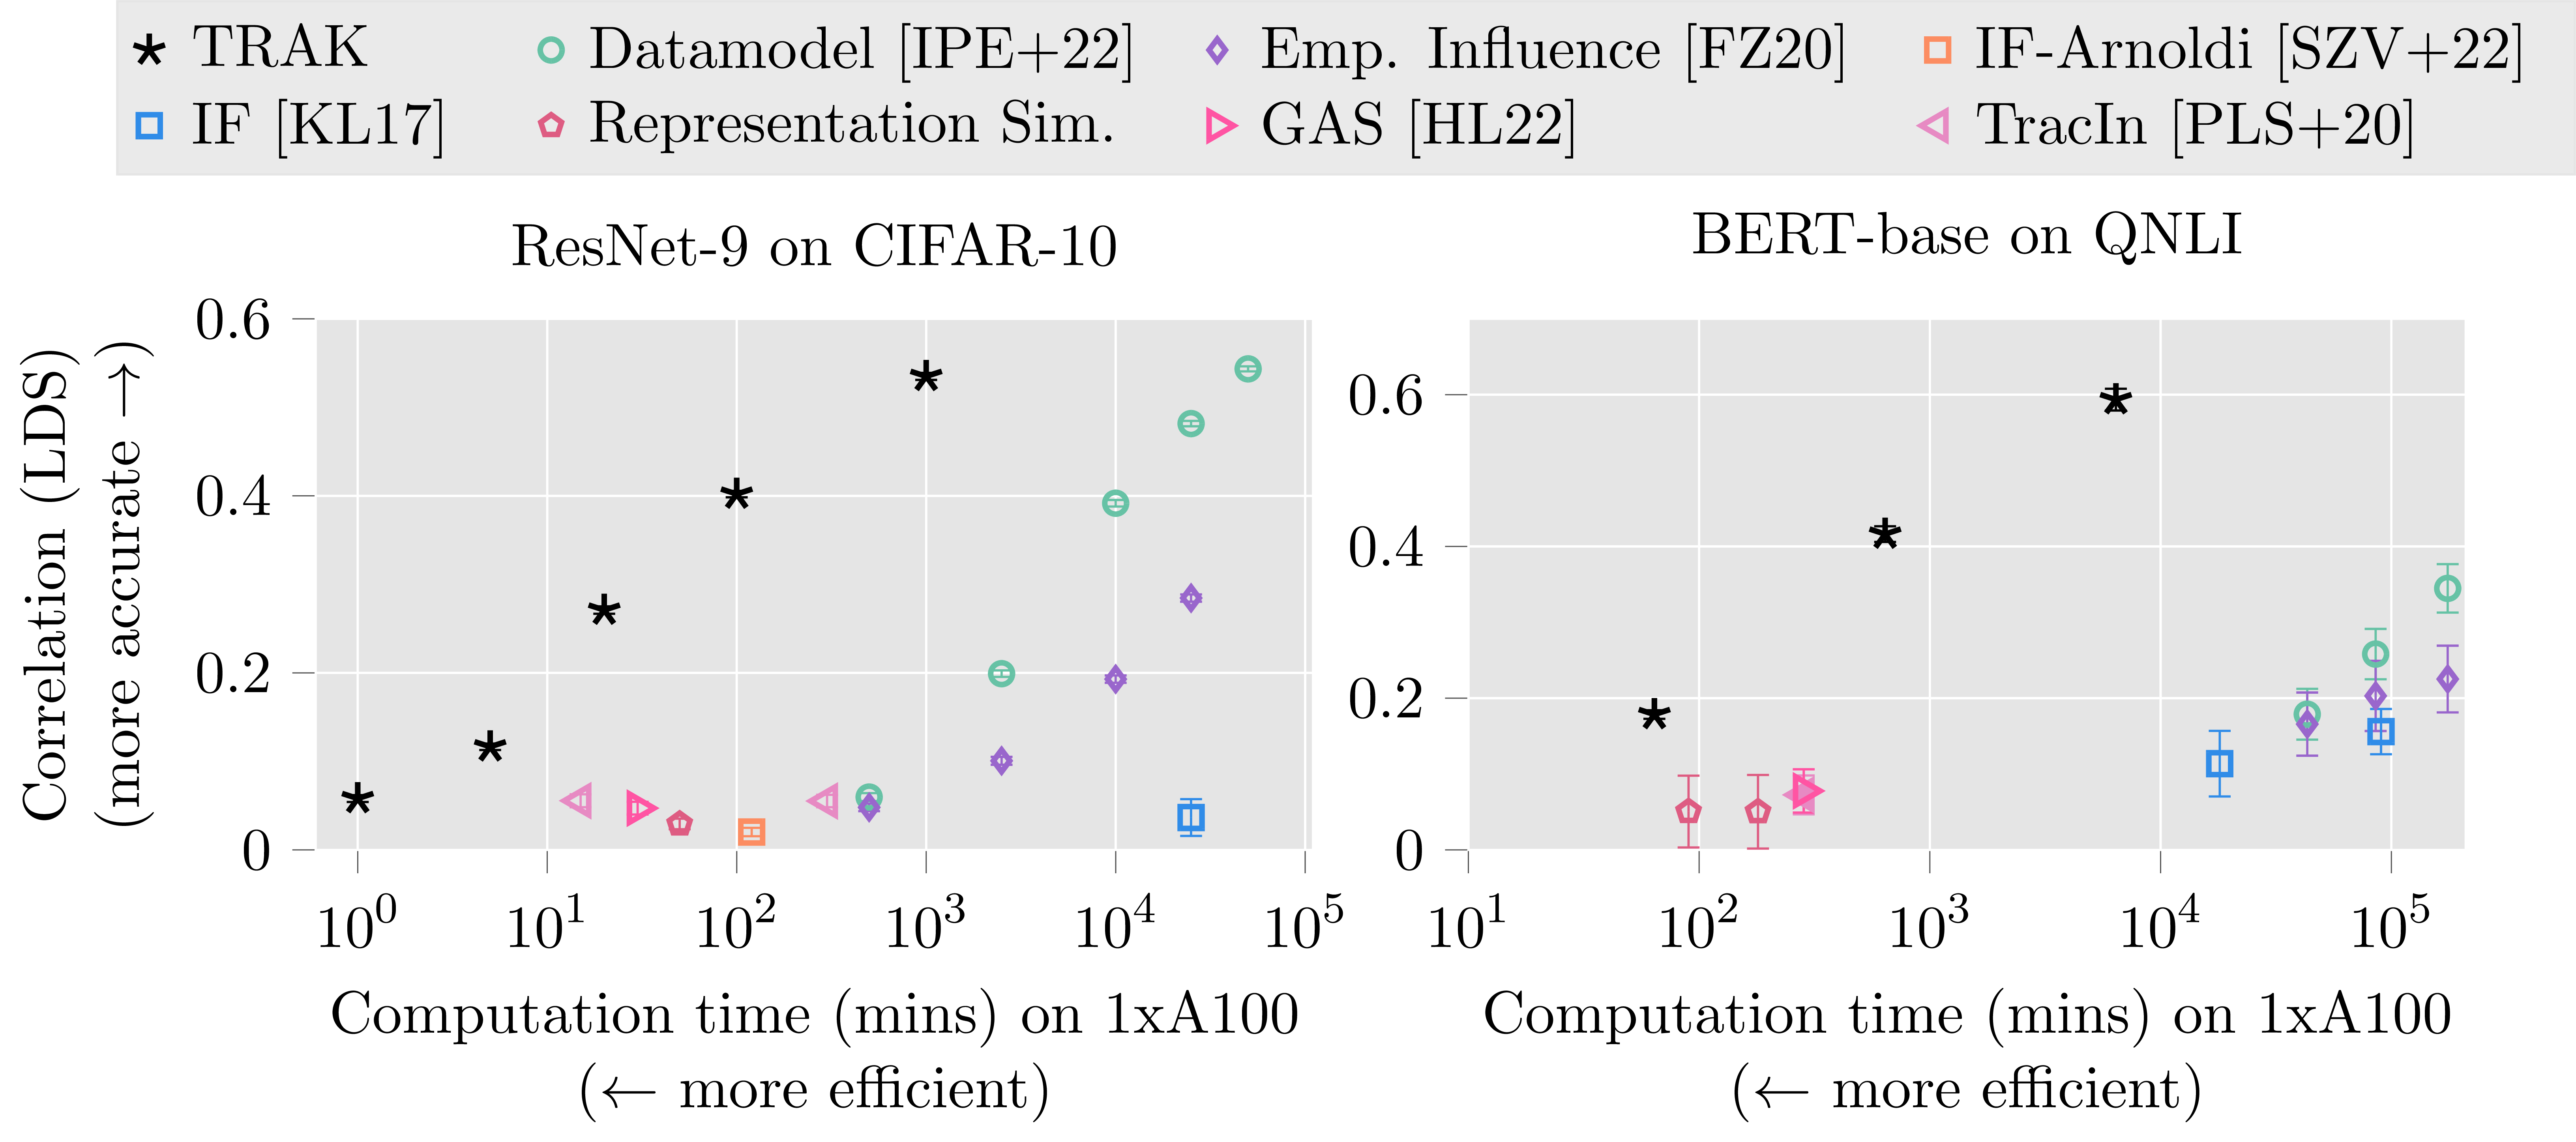 The same scatterplot shown earlier, this time with 3 points showing the performance of
TRAK, which strongly Pareto-dominates existing methods